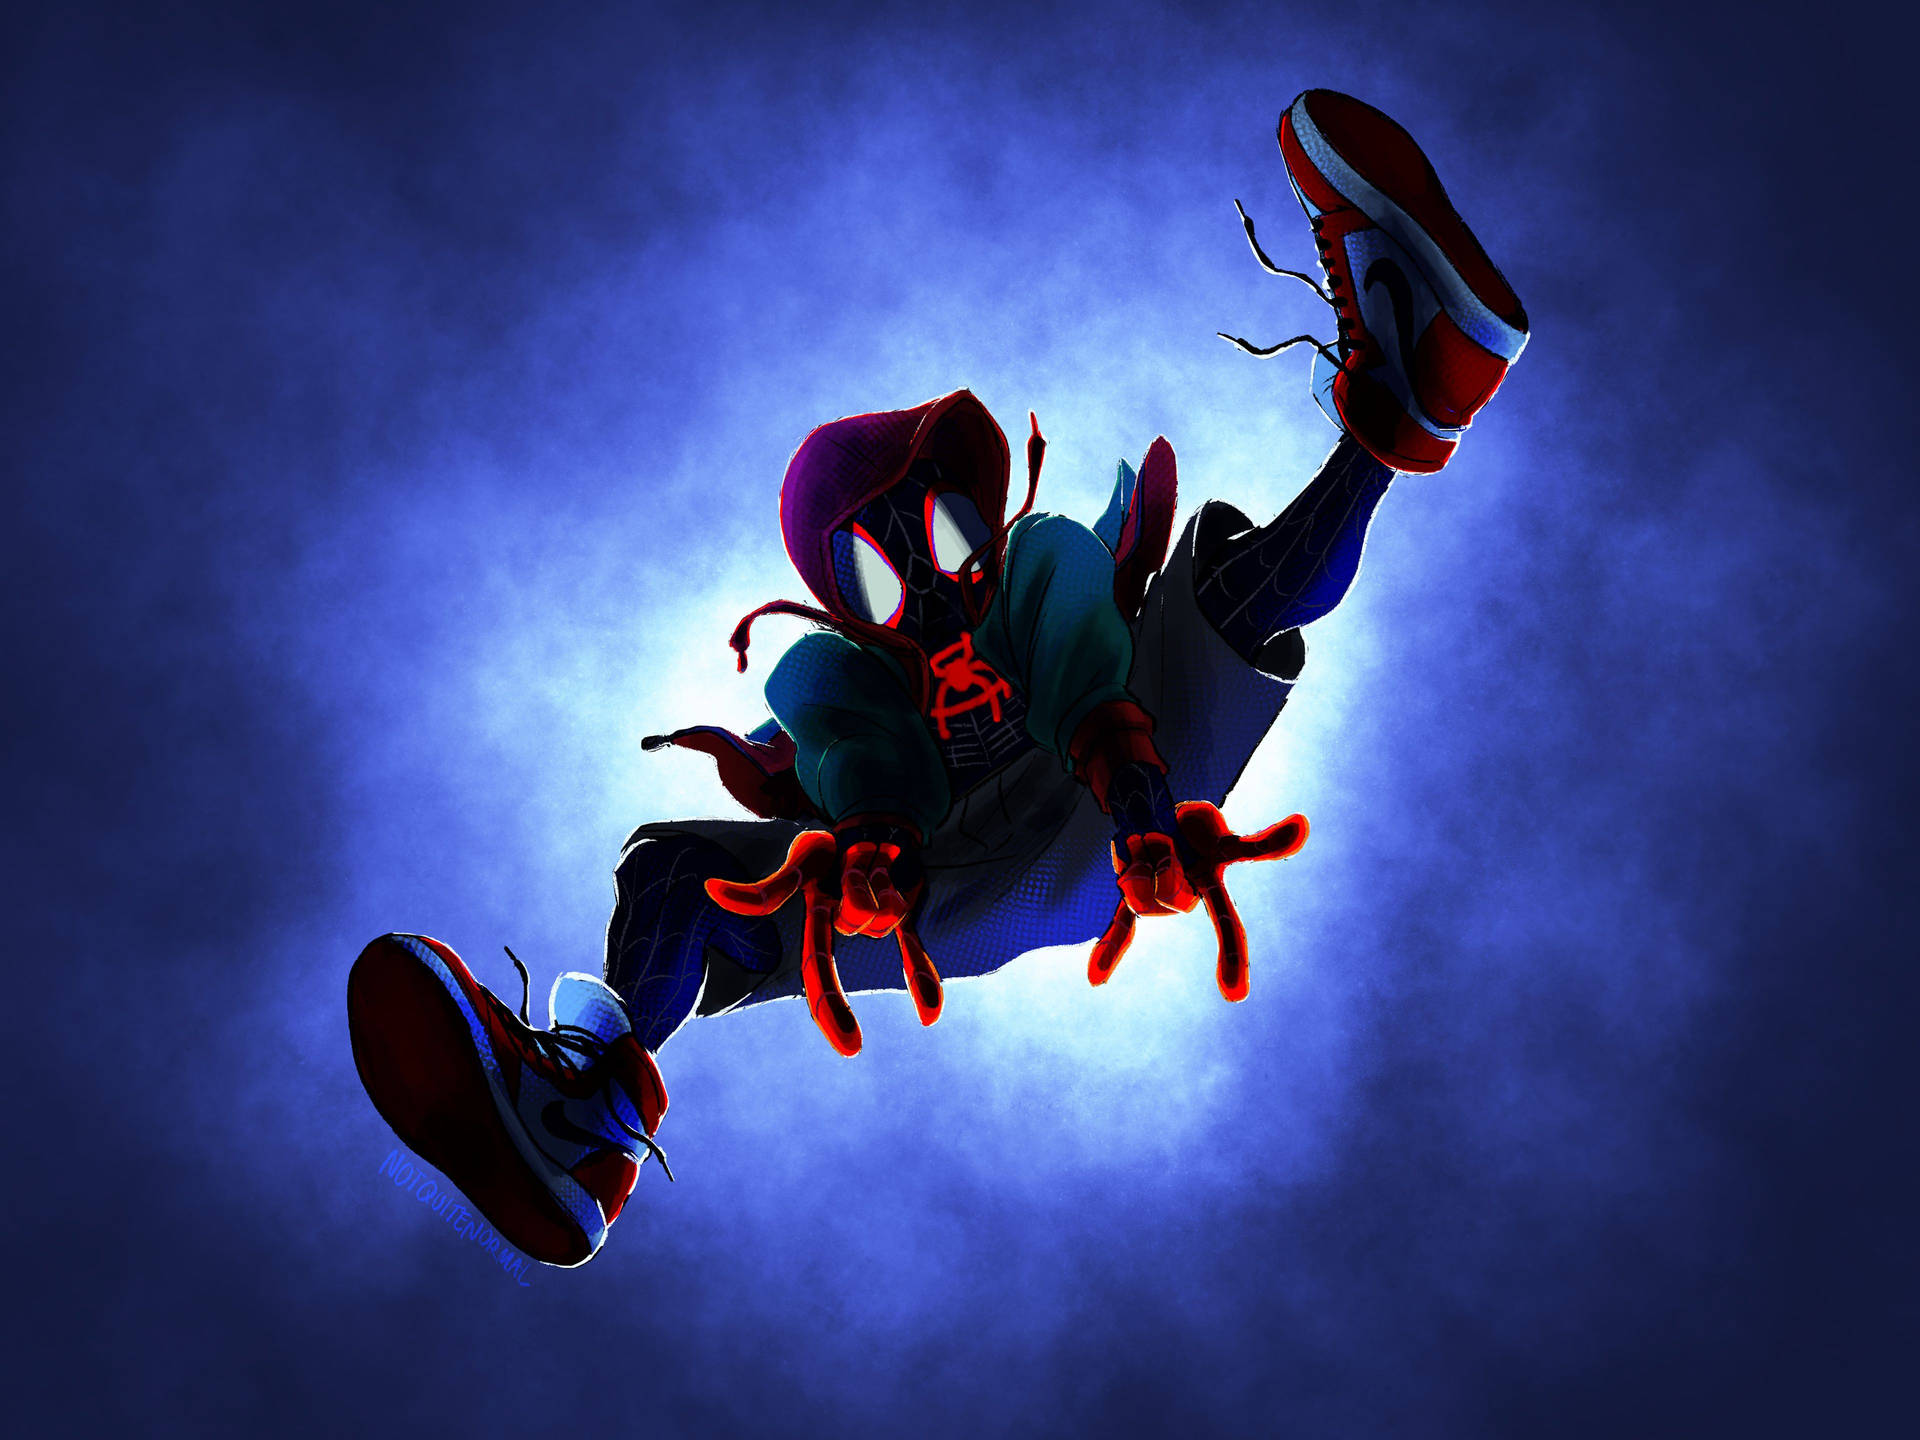 Miles Morales Ascends Into The Blue Sky Wallpaper